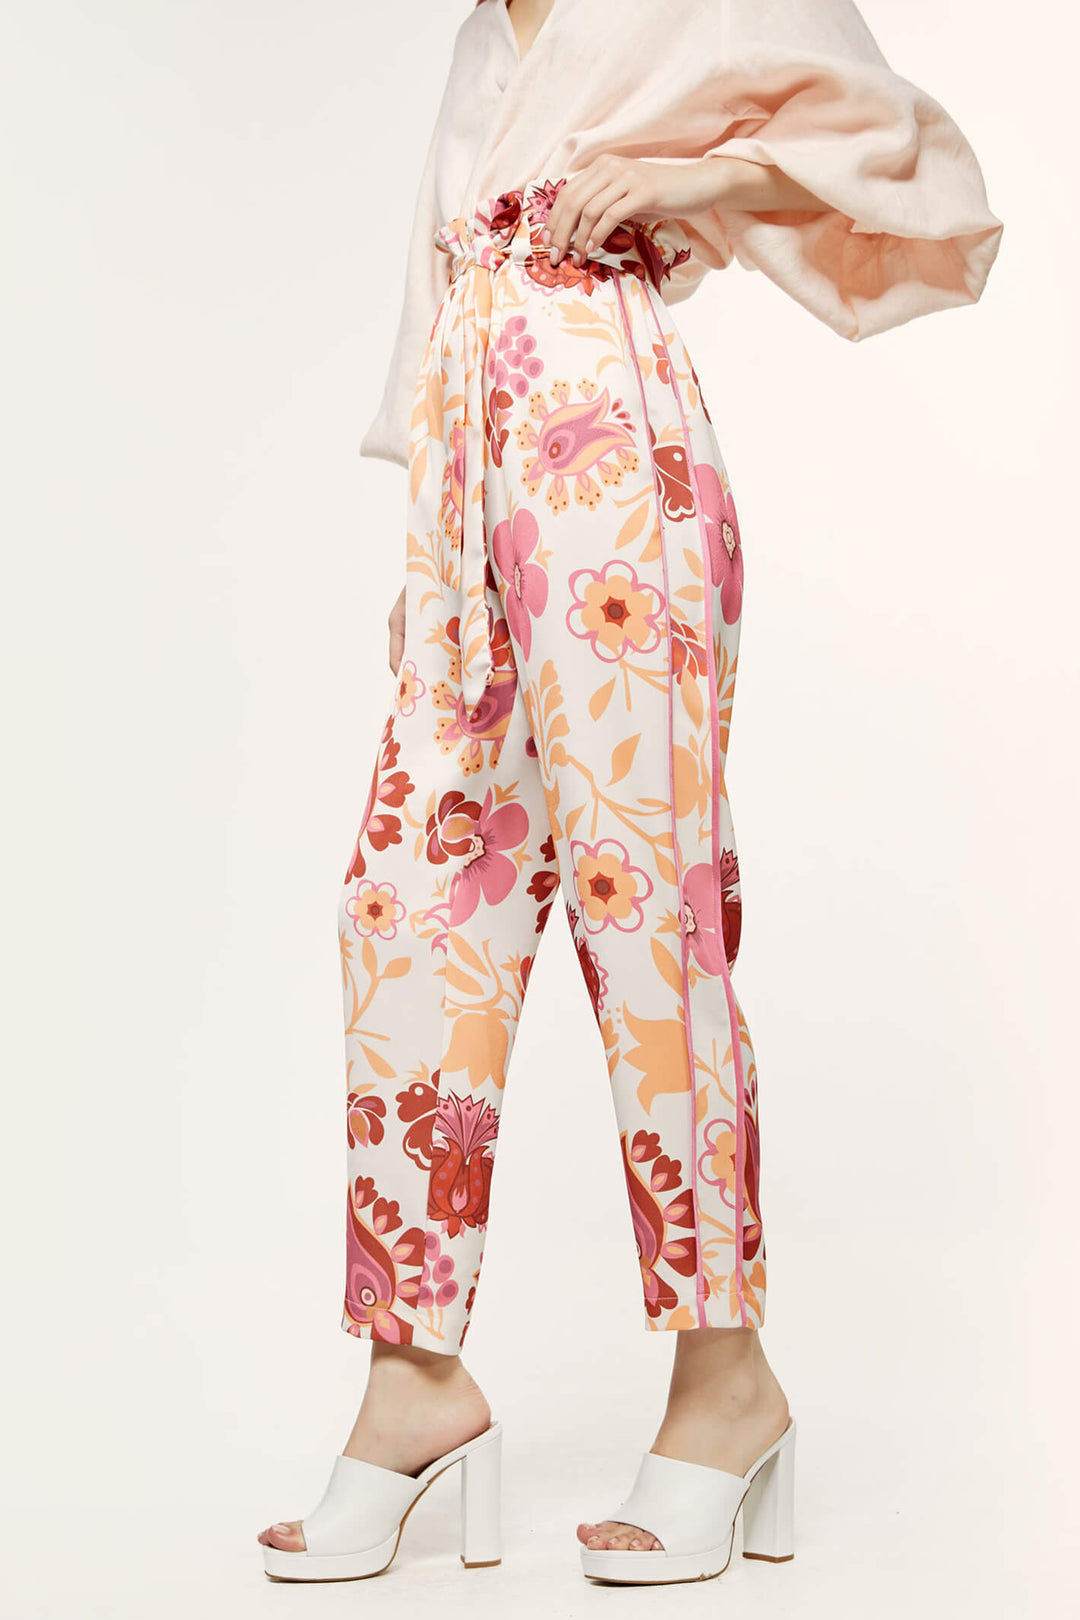 Access Fashion 5142 Vanilla Floral Trousers - Experience Boutique